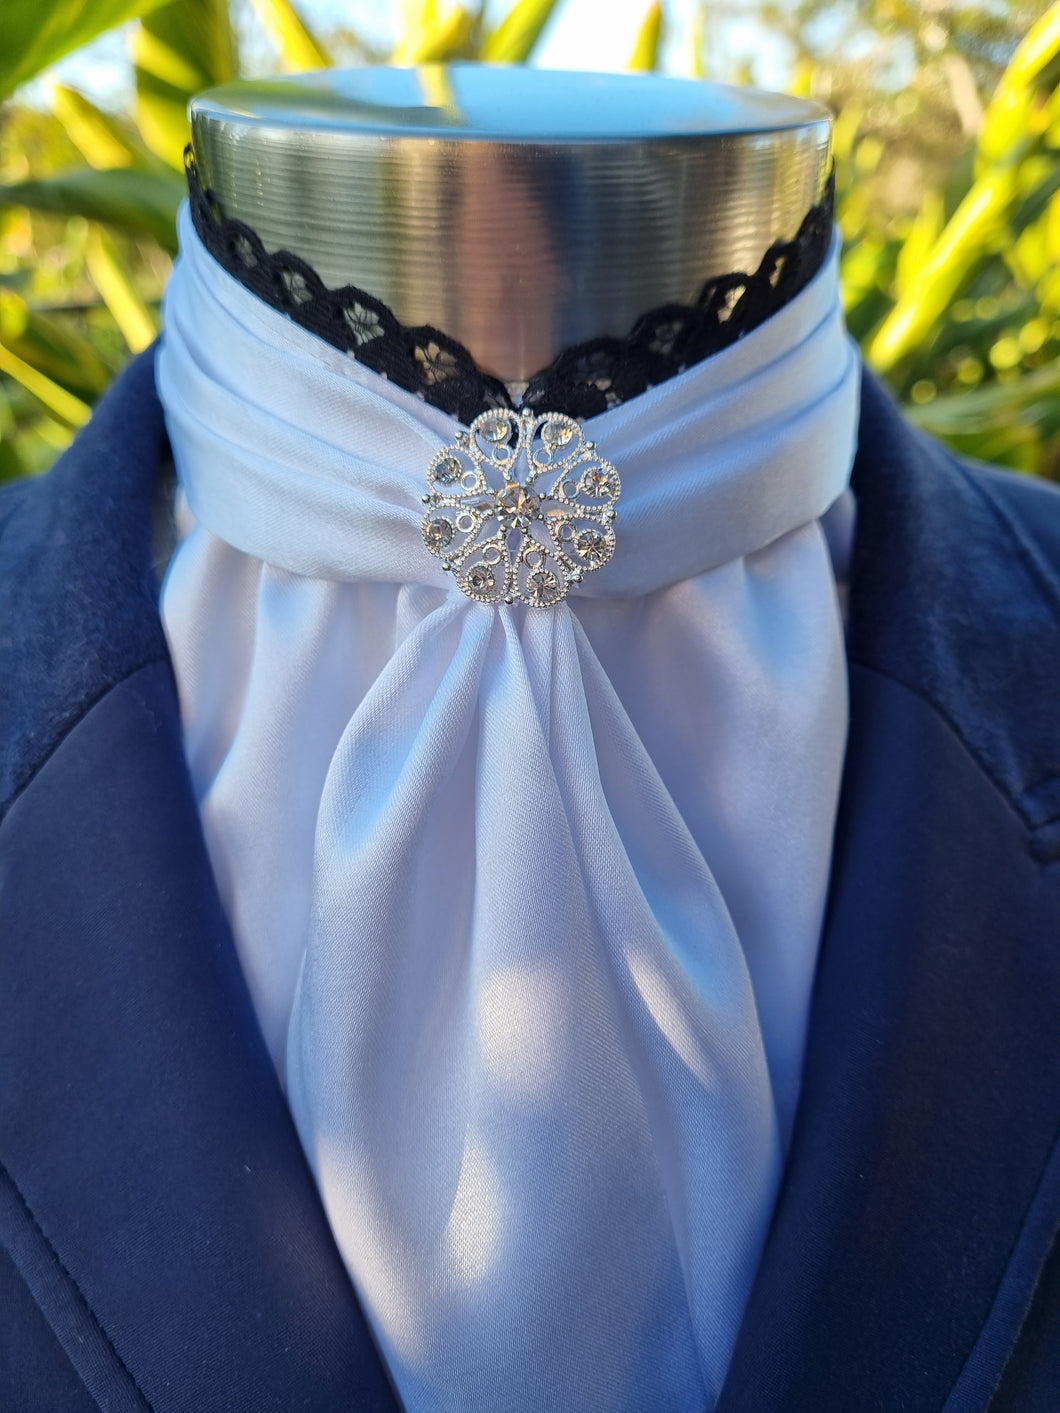 EURO BELLE STOCK TIE - White lustre satin with black lace trim & brooch